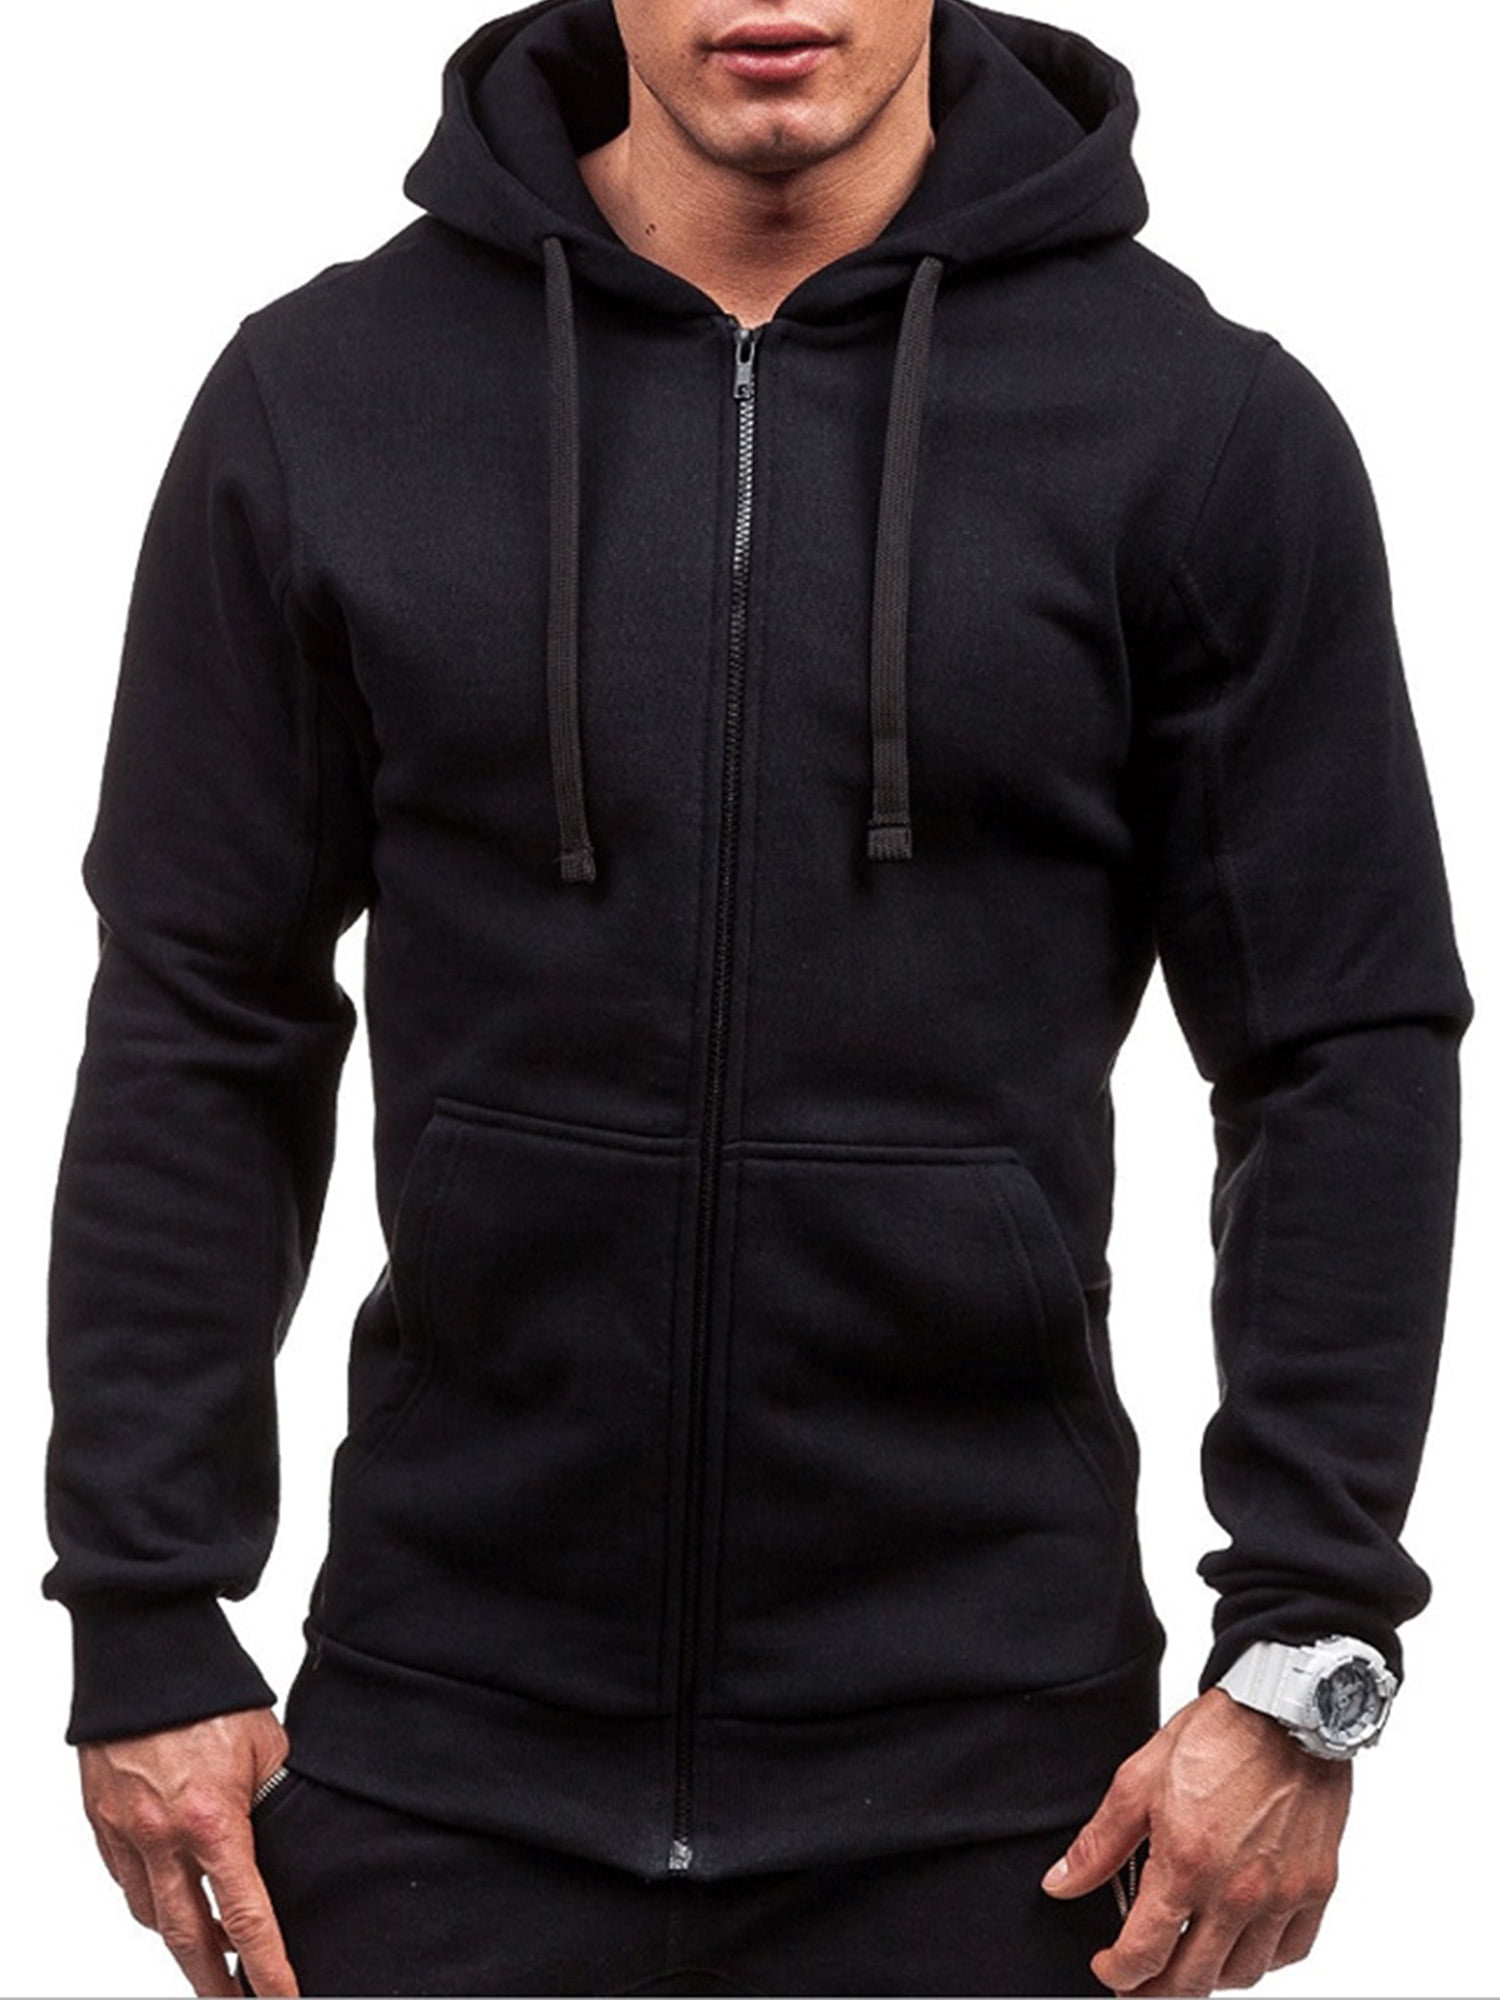 Details about   Erima Sport Training Running Casual Mens Full Zip Hooded Jacket Tracksuit Top 